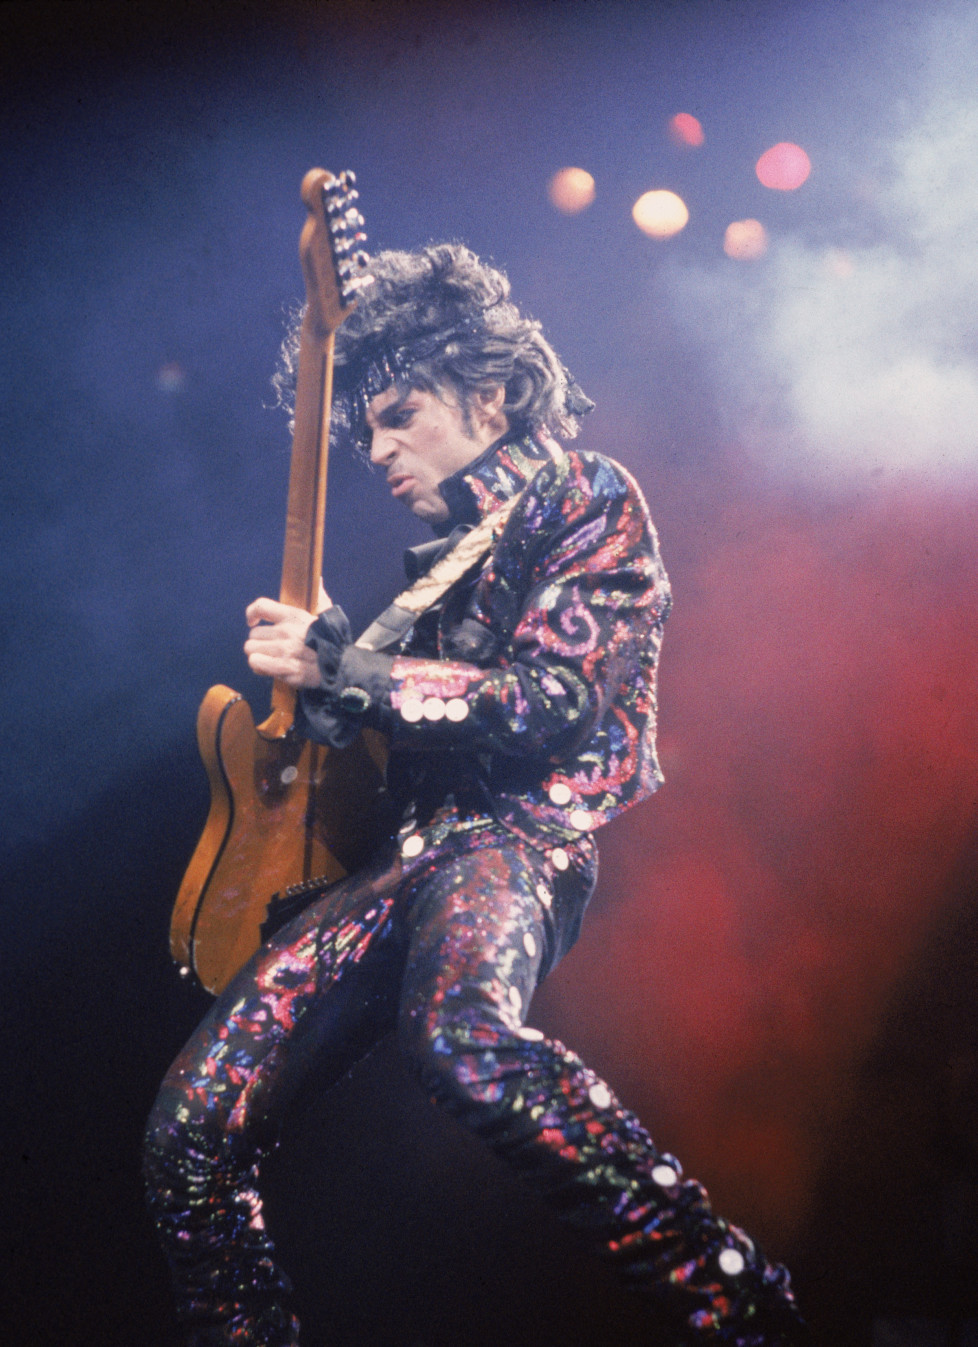 American rock singer and songwriter Prince plays guitar on stage during a concert, 1985. (Photo by Frank Micelotta/Getty Images)